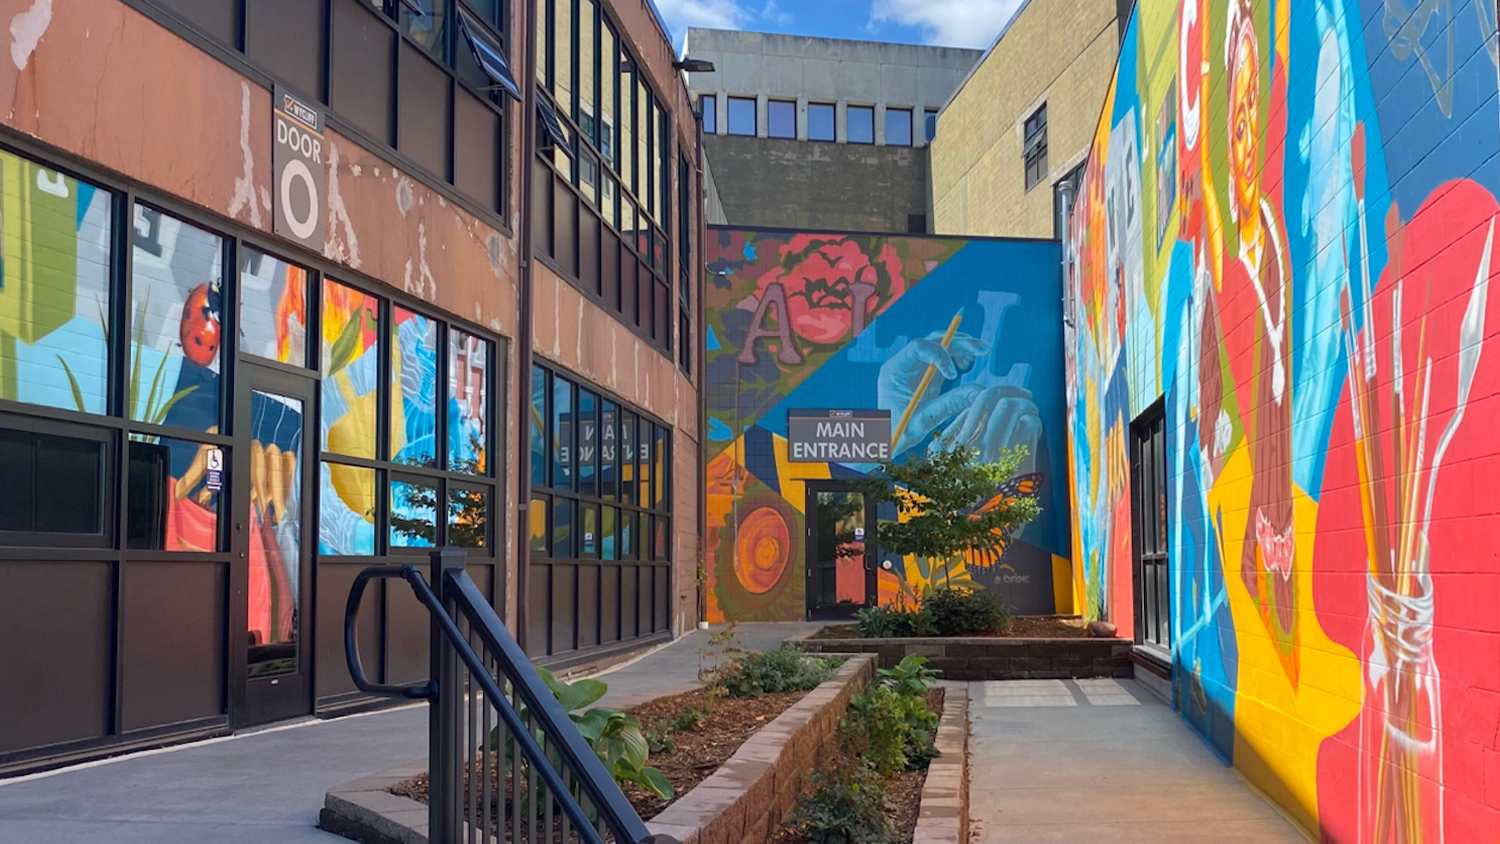 Brick building painted with a colorful mural entrance showing the entry to Rockstoria Studios St. Paul MN located in the WYCLIFF Building on level 3.